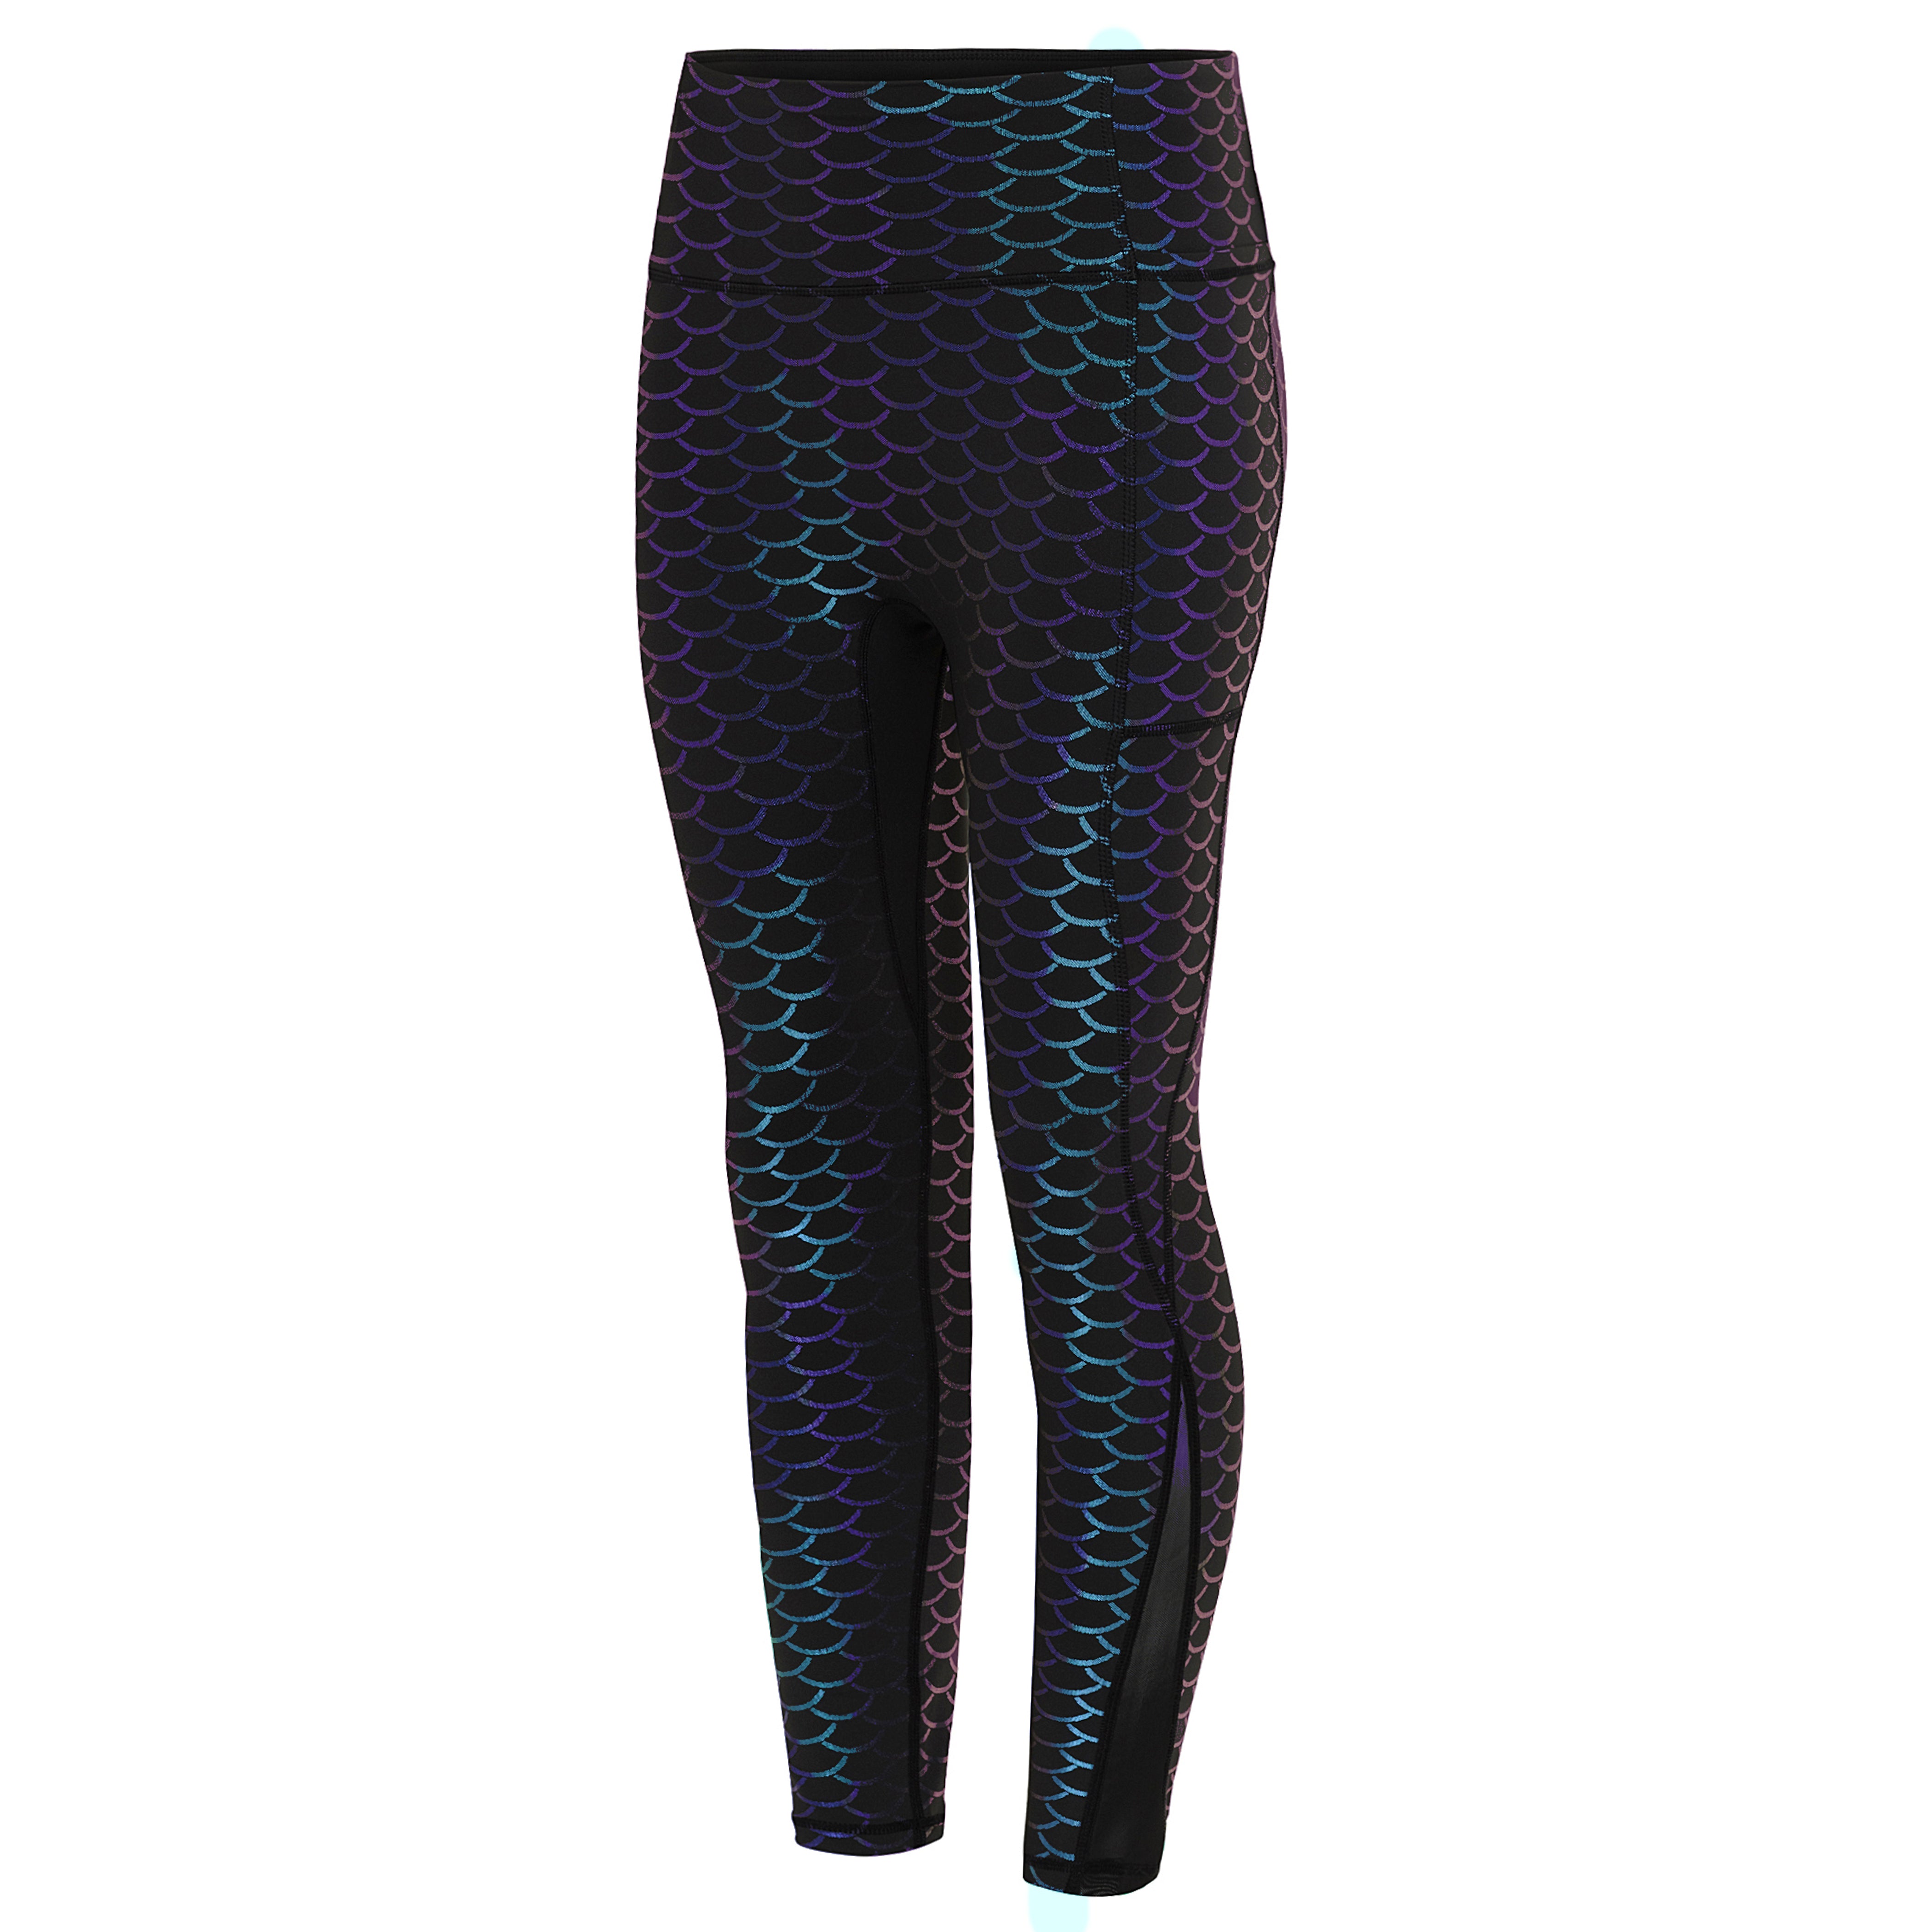 Rocking our gorgeous Lady Dragon High Waist Leggings . One of our